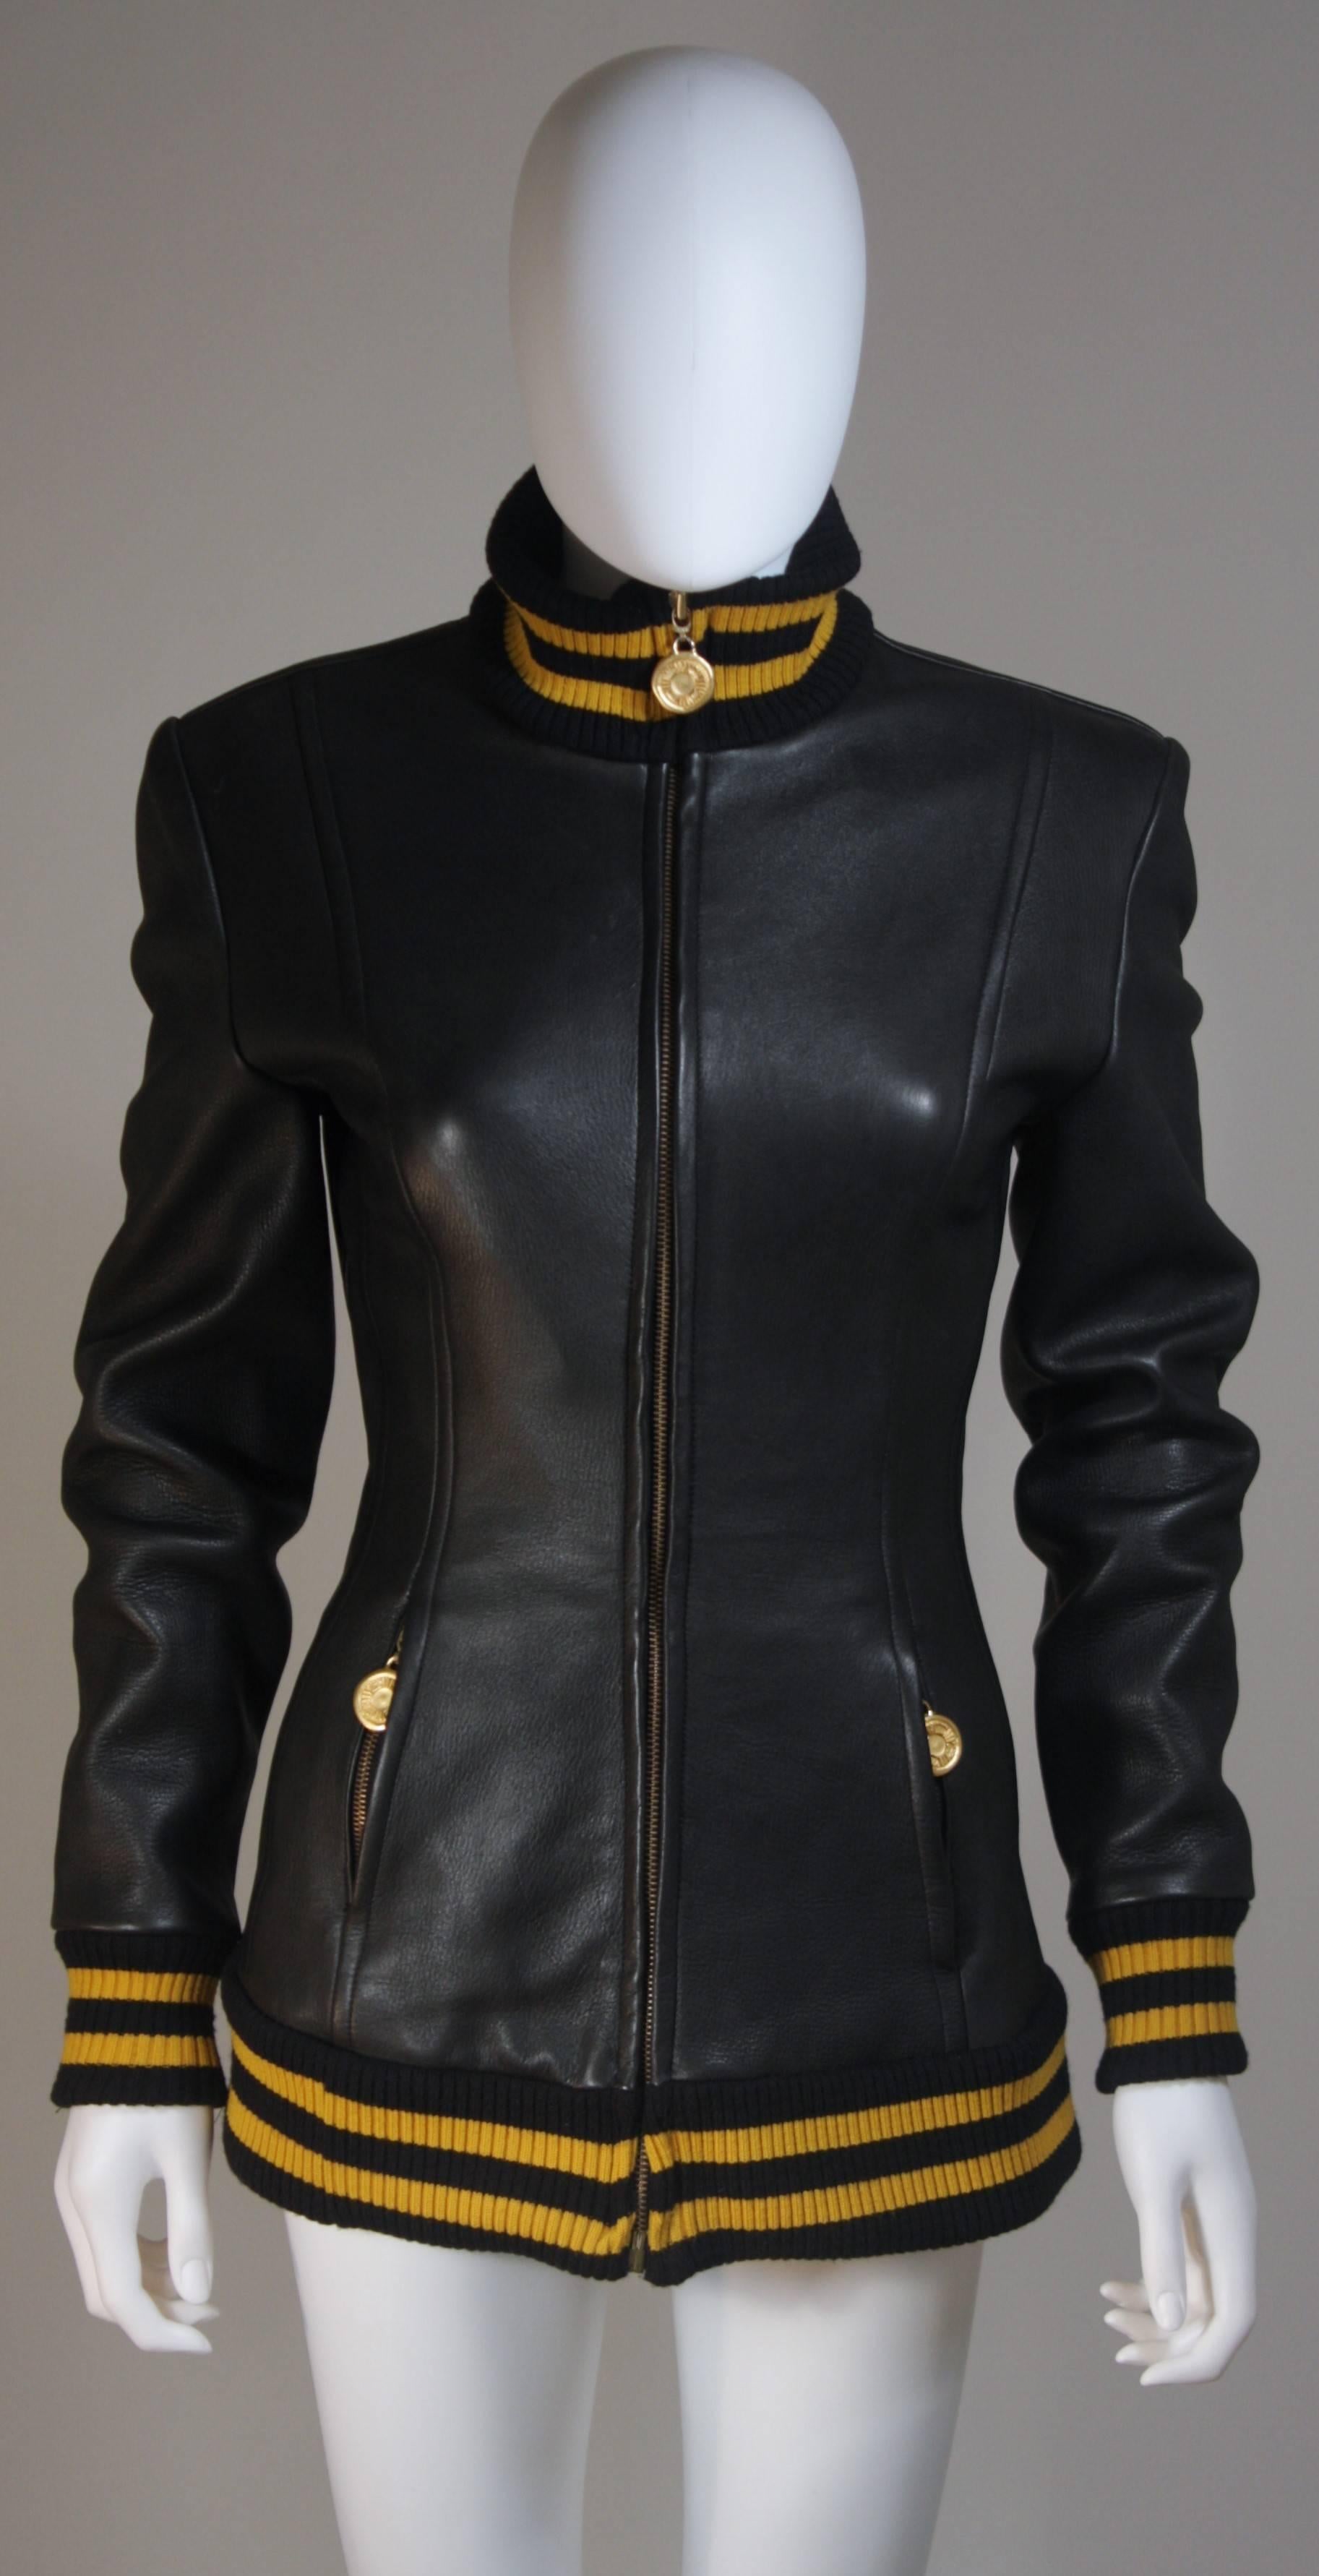  This Donna Karan New York design is available for viewing at our Beverly Hills Boutique. We offer a large selection of evening gowns and luxury garments. 

 This jacket is composed of black leather with a yellow striped ribbing at the collar,